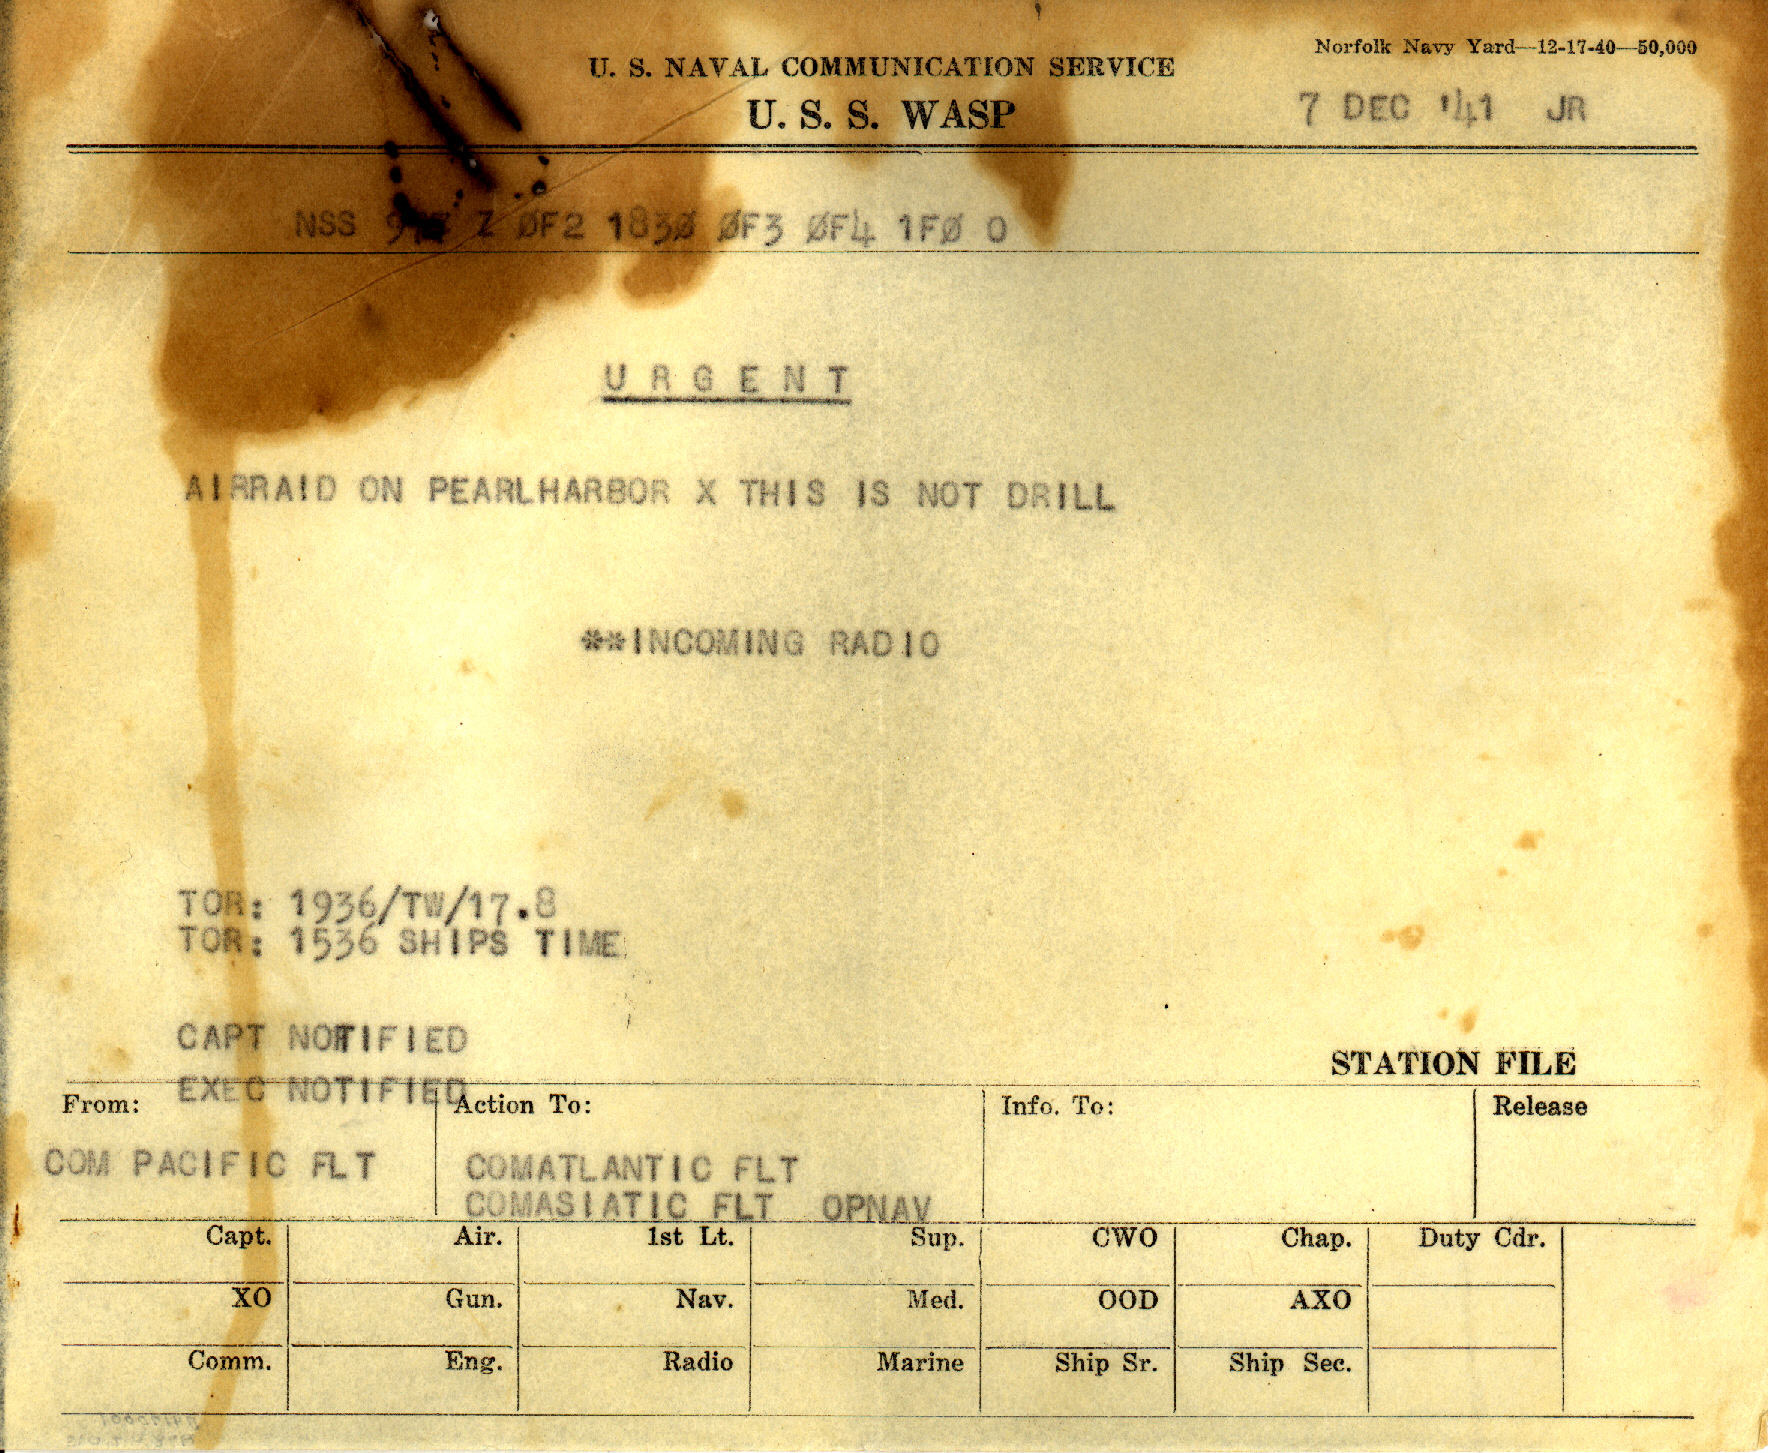 'AIRRAID ON PEARLHARBOR X THIS IS NOT DRILL' radio message received by USS Wasp, 7 Dec 1941. Wasp was anchored at Bermuda at the time.